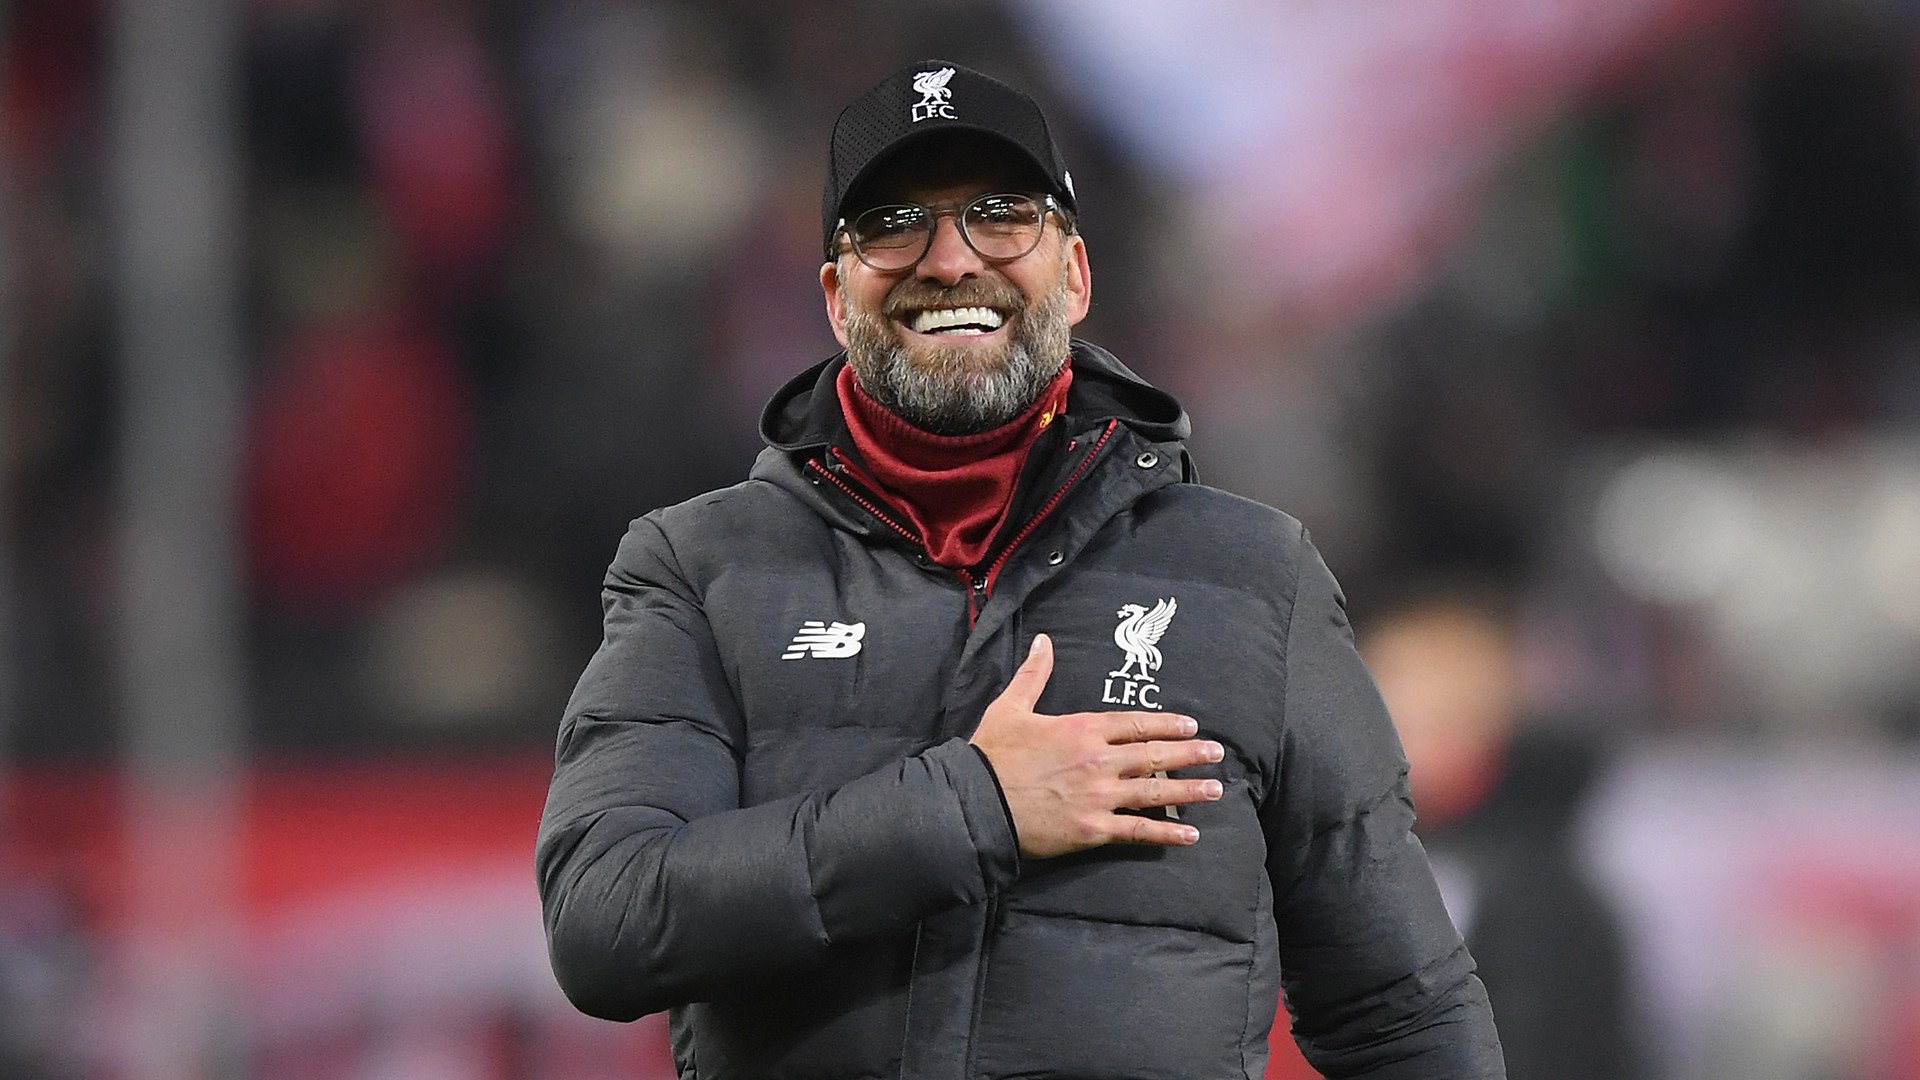 Champions League Berth Would Be Massive For Liverpool Klopp 66